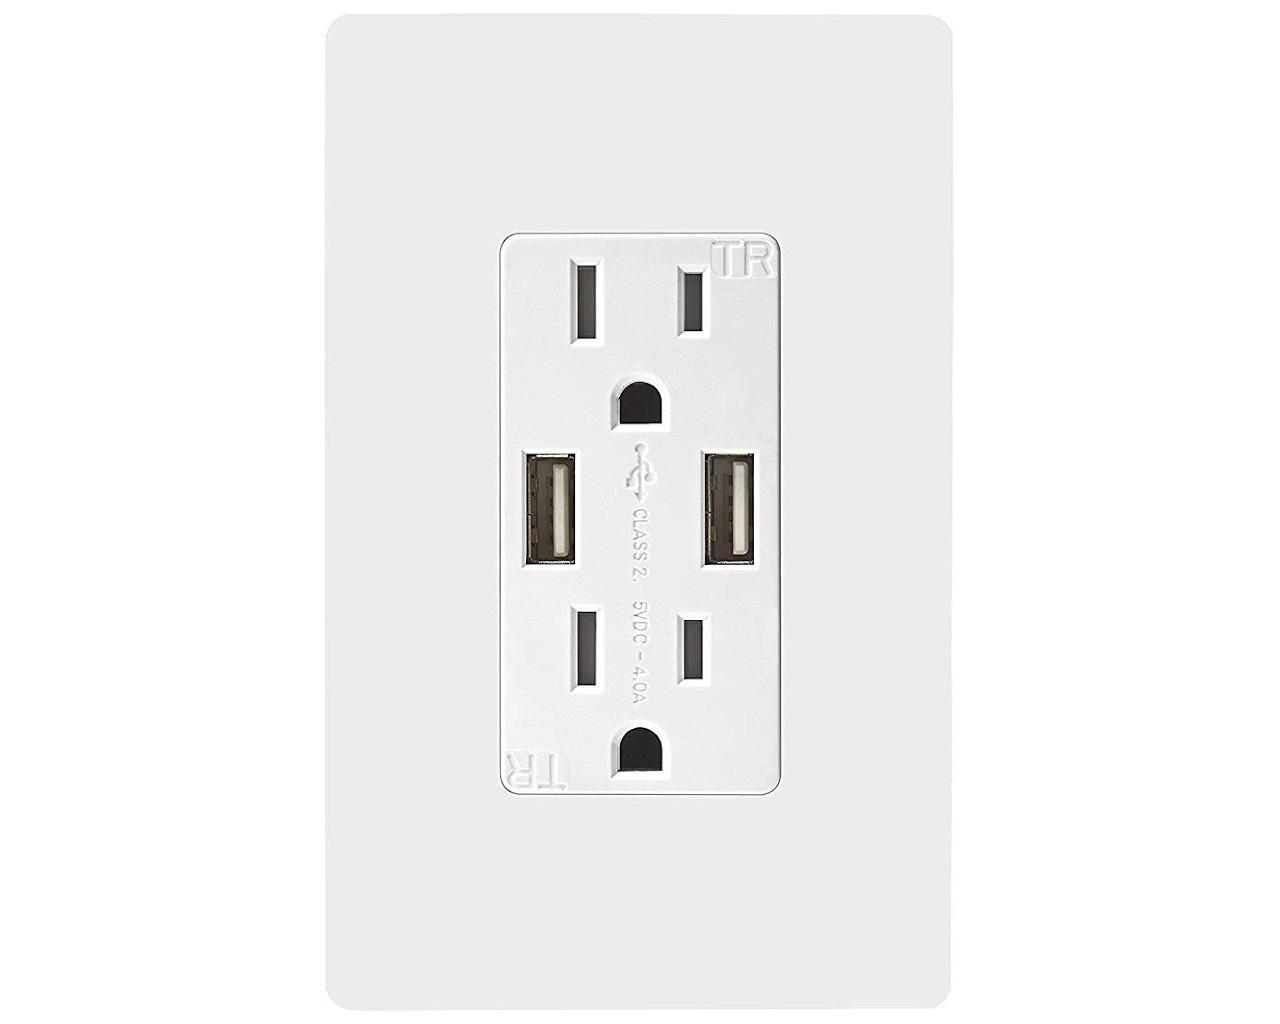 10 Usb Wall Outlets To Move Your Home Or Office Into The Future Techrepublic